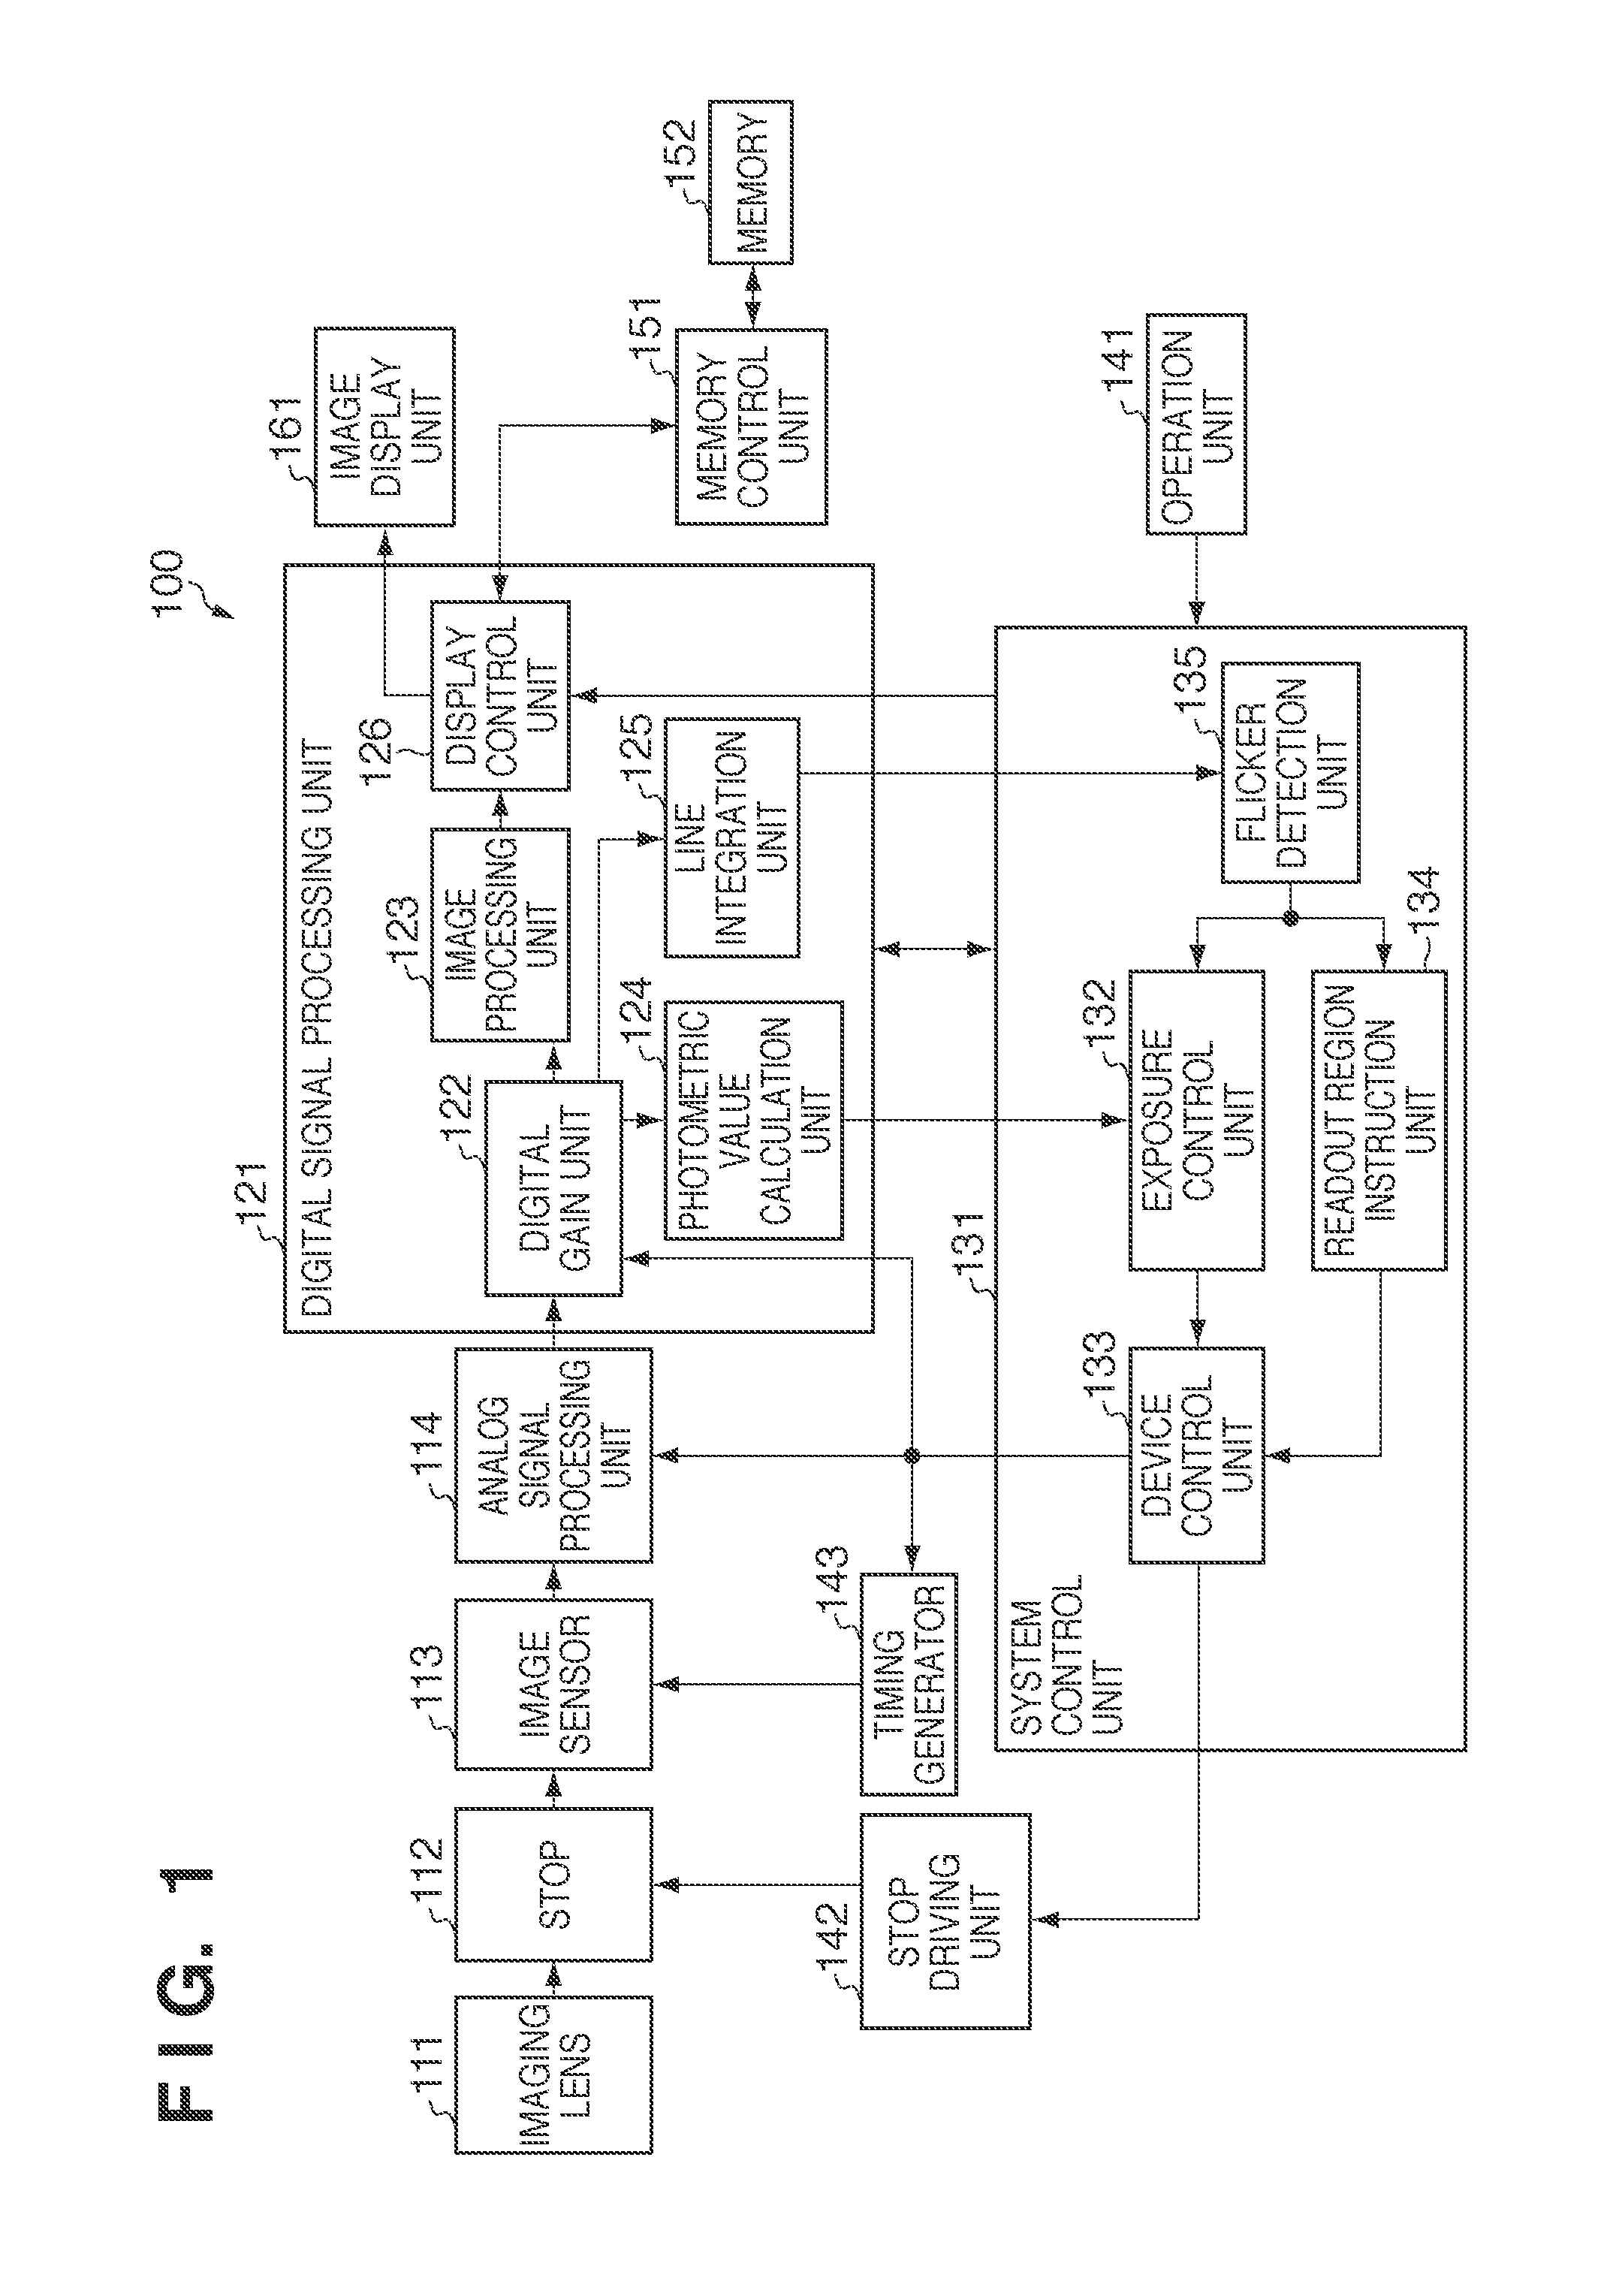 Image capture apparatus and zooming method